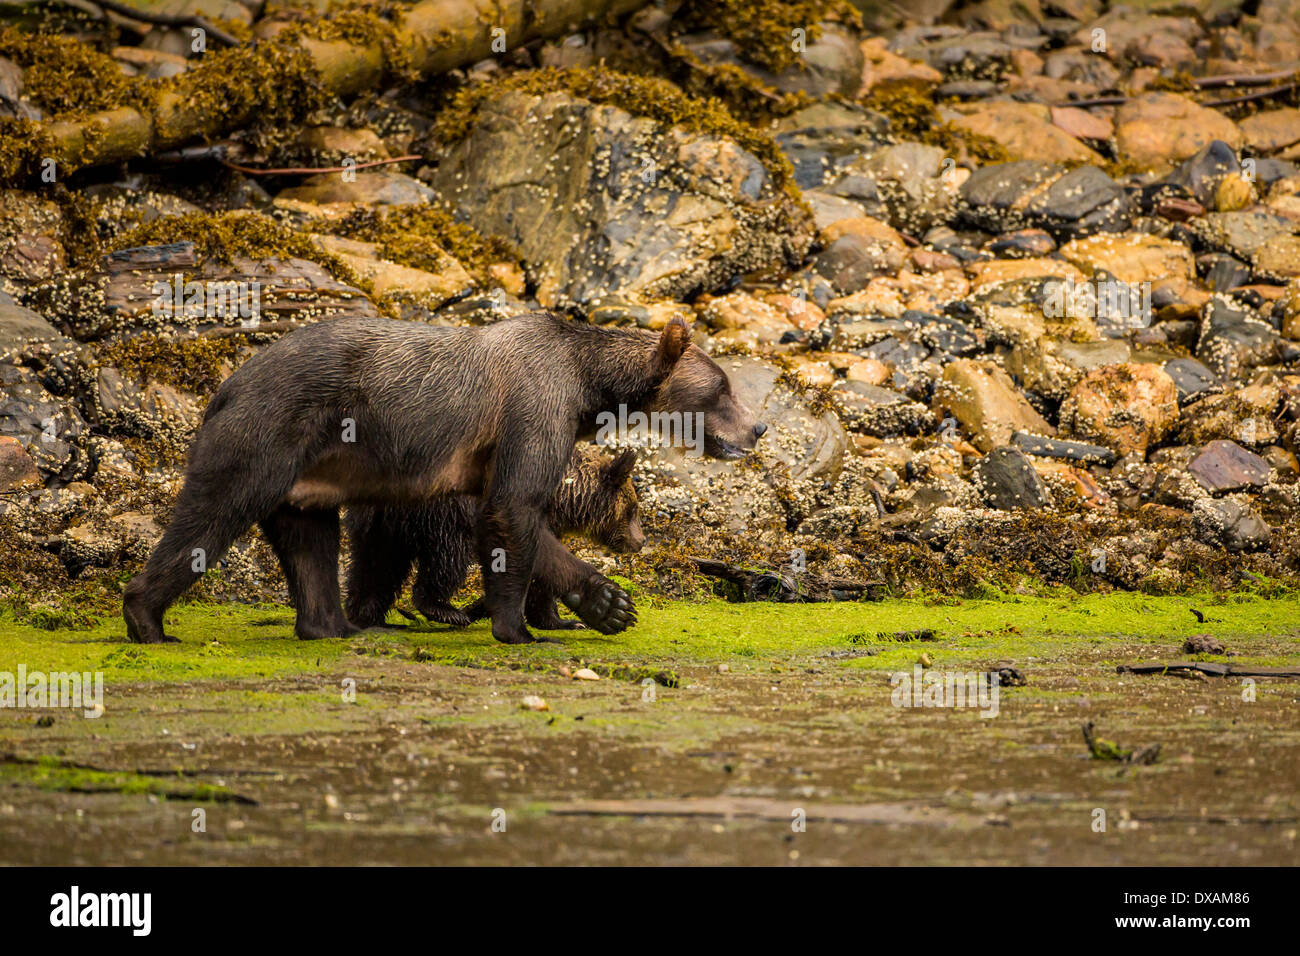 A female Grizzly Bear and her cub walk on a beach in British Columbia's Khutzeymateen Inlet exposed during low tide. Stock Photo